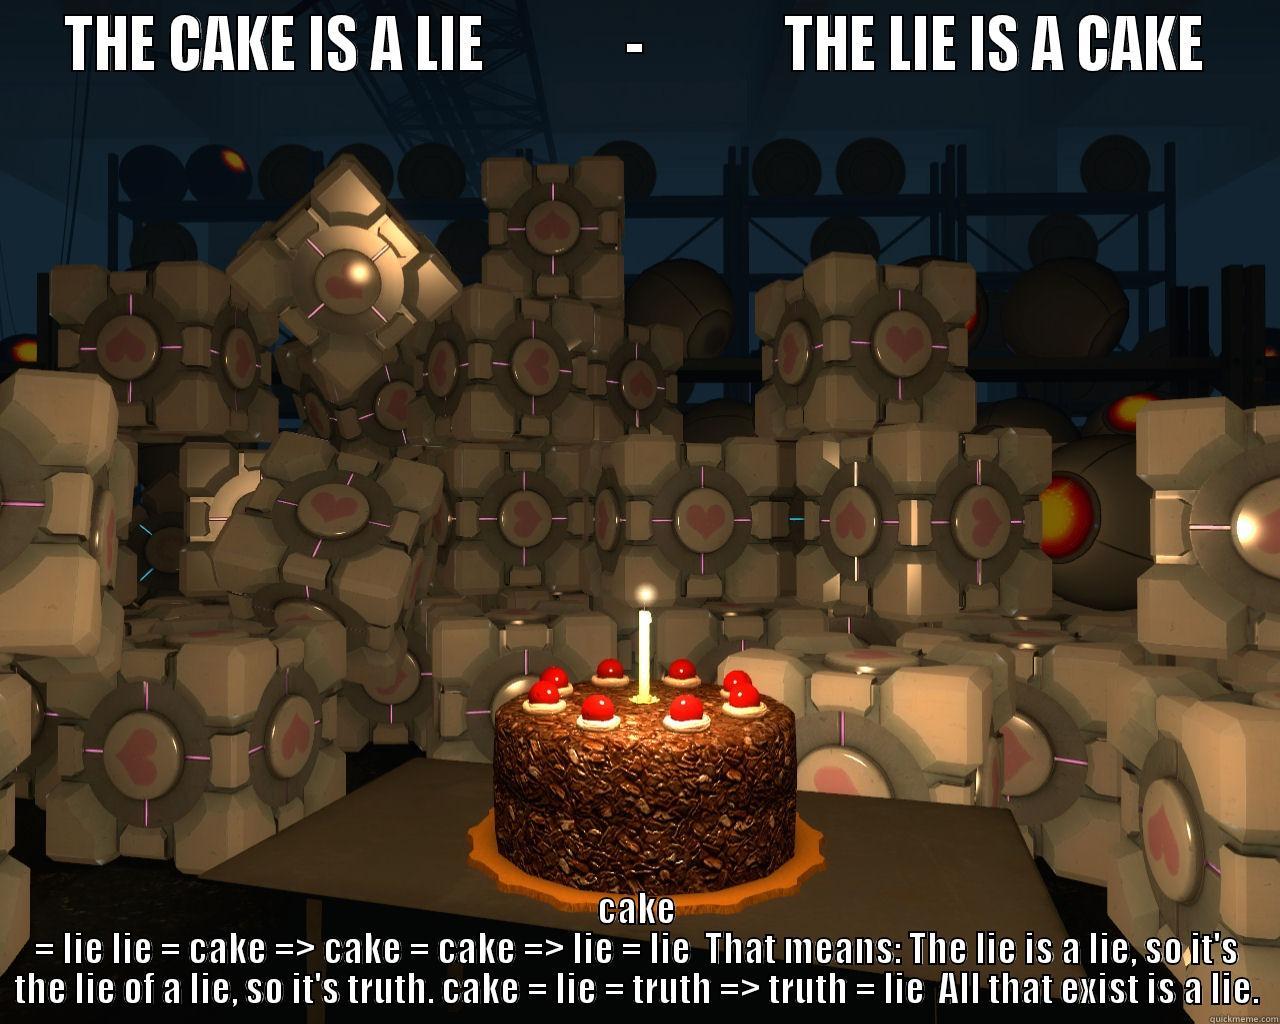 The cake is a lie - The lie is a cake - THE CAKE IS A LIE            -            THE LIE IS A CAKE CAKE = LIE LIE = CAKE => CAKE = CAKE => LIE = LIE  THAT MEANS: THE LIE IS A LIE, SO IT'S THE LIE OF A LIE, SO IT'S TRUTH. CAKE = LIE = TRUTH => TRUTH = LIE  ALL THAT EXIST IS A LIE. Misc